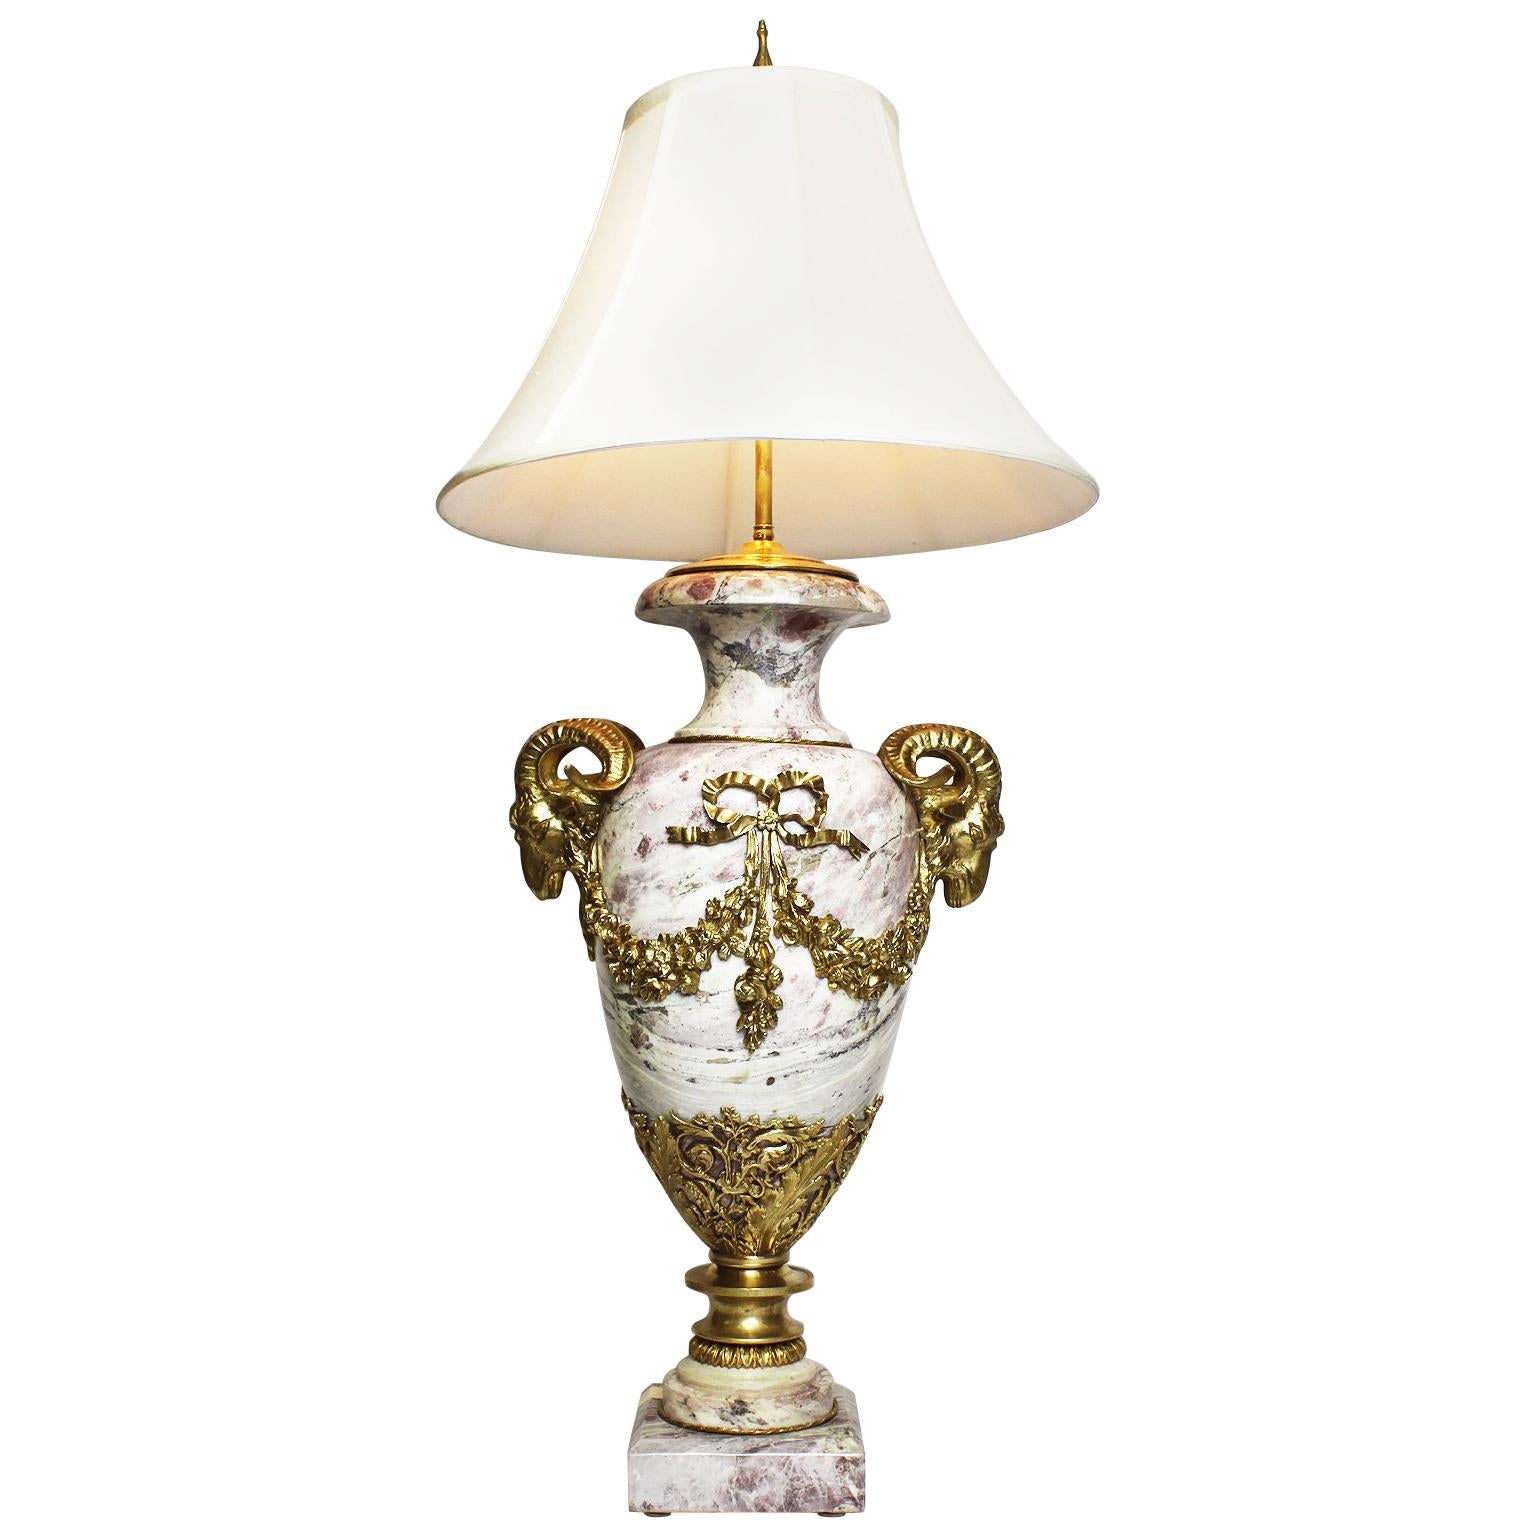 French 19th-20th Century Louis XV Style Marble and Gilt Bronze-Mounted Urn Lamp